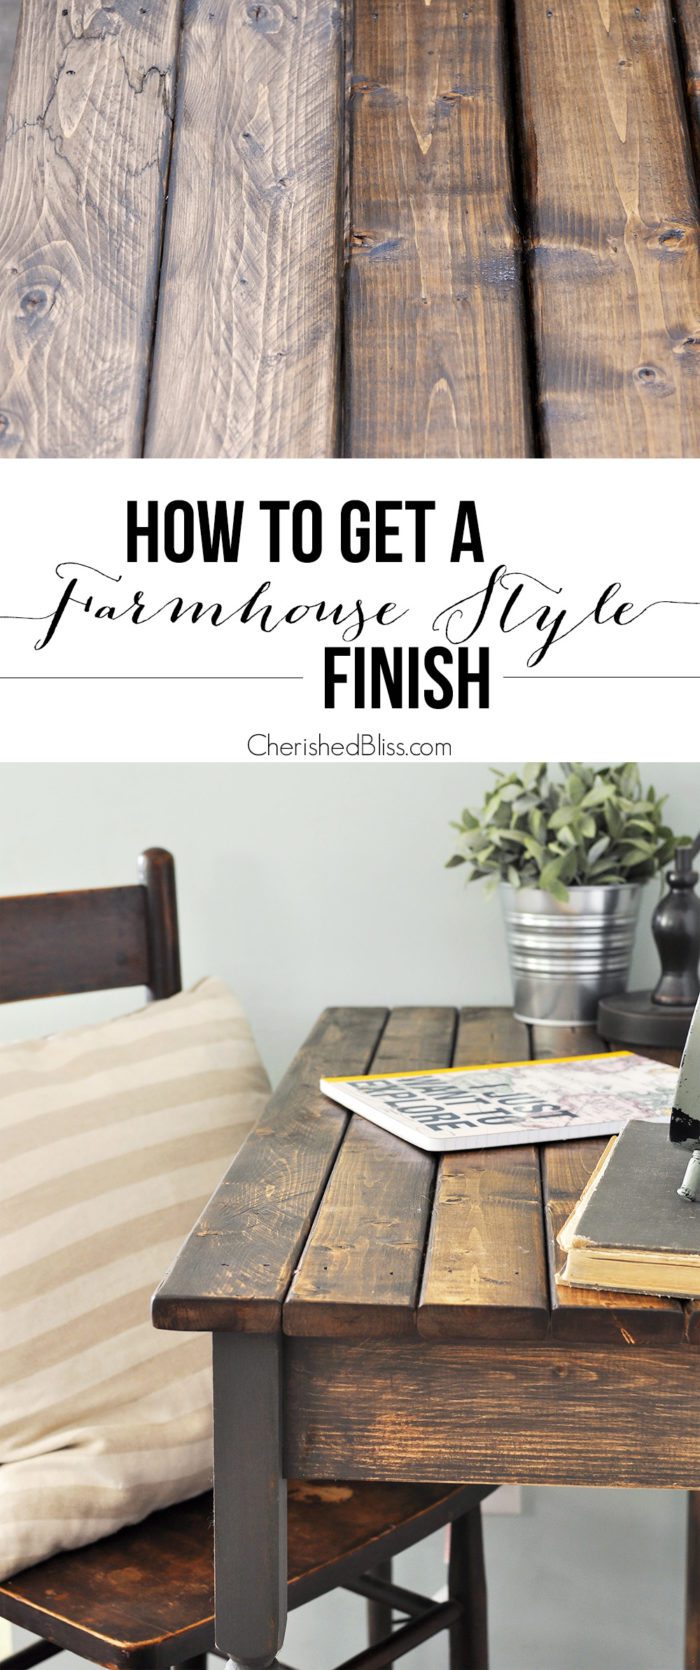 An easy step-by-step tutorial for finishing raw wood or furniture. With this technique you can apply a Farmhouse Style Finish to your next DIY project. 